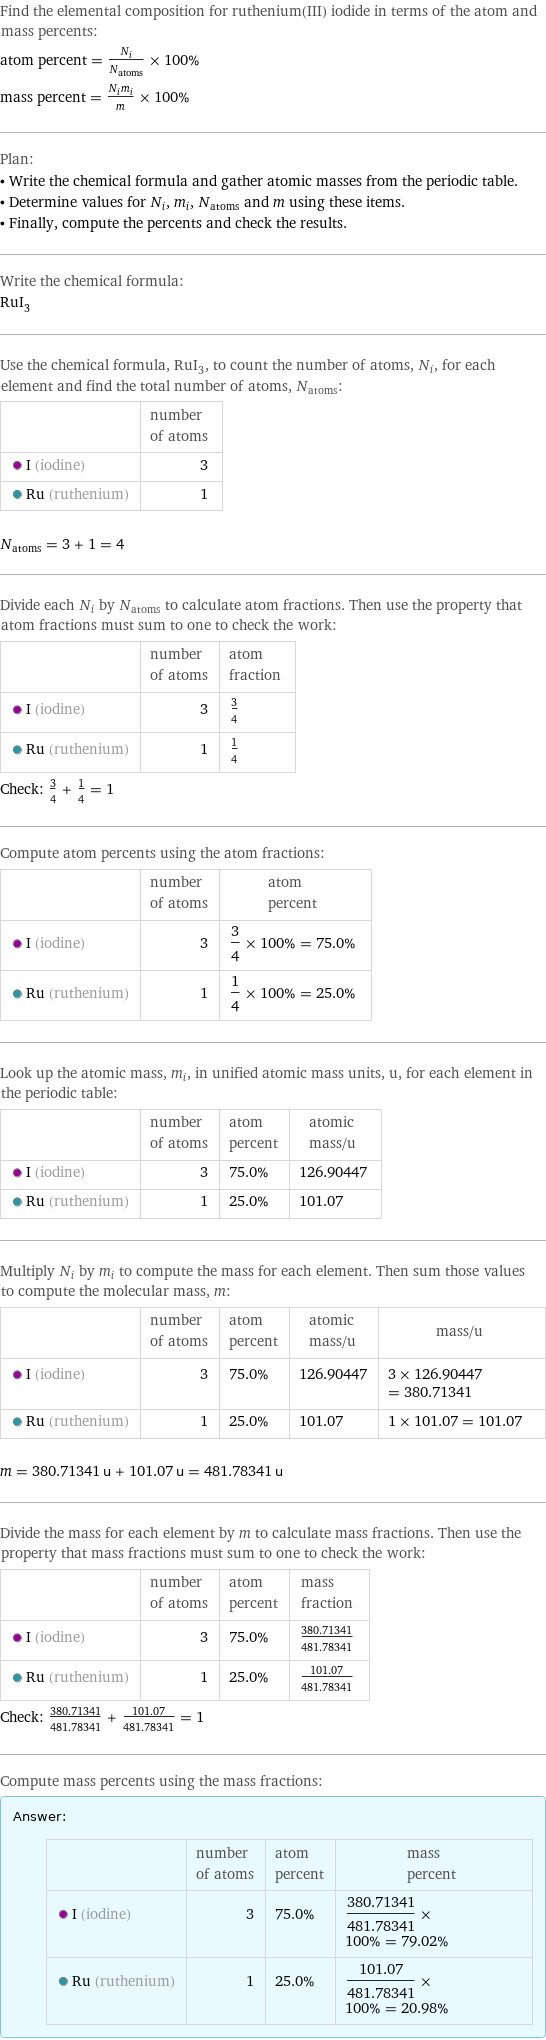 Find the elemental composition for ruthenium(III) iodide in terms of the atom and mass percents: atom percent = N_i/N_atoms × 100% mass percent = (N_im_i)/m × 100% Plan: • Write the chemical formula and gather atomic masses from the periodic table. • Determine values for N_i, m_i, N_atoms and m using these items. • Finally, compute the percents and check the results. Write the chemical formula: RuI_3 Use the chemical formula, RuI_3, to count the number of atoms, N_i, for each element and find the total number of atoms, N_atoms:  | number of atoms  I (iodine) | 3  Ru (ruthenium) | 1  N_atoms = 3 + 1 = 4 Divide each N_i by N_atoms to calculate atom fractions. Then use the property that atom fractions must sum to one to check the work:  | number of atoms | atom fraction  I (iodine) | 3 | 3/4  Ru (ruthenium) | 1 | 1/4 Check: 3/4 + 1/4 = 1 Compute atom percents using the atom fractions:  | number of atoms | atom percent  I (iodine) | 3 | 3/4 × 100% = 75.0%  Ru (ruthenium) | 1 | 1/4 × 100% = 25.0% Look up the atomic mass, m_i, in unified atomic mass units, u, for each element in the periodic table:  | number of atoms | atom percent | atomic mass/u  I (iodine) | 3 | 75.0% | 126.90447  Ru (ruthenium) | 1 | 25.0% | 101.07 Multiply N_i by m_i to compute the mass for each element. Then sum those values to compute the molecular mass, m:  | number of atoms | atom percent | atomic mass/u | mass/u  I (iodine) | 3 | 75.0% | 126.90447 | 3 × 126.90447 = 380.71341  Ru (ruthenium) | 1 | 25.0% | 101.07 | 1 × 101.07 = 101.07  m = 380.71341 u + 101.07 u = 481.78341 u Divide the mass for each element by m to calculate mass fractions. Then use the property that mass fractions must sum to one to check the work:  | number of atoms | atom percent | mass fraction  I (iodine) | 3 | 75.0% | 380.71341/481.78341  Ru (ruthenium) | 1 | 25.0% | 101.07/481.78341 Check: 380.71341/481.78341 + 101.07/481.78341 = 1 Compute mass percents using the mass fractions: Answer: |   | | number of atoms | atom percent | mass percent  I (iodine) | 3 | 75.0% | 380.71341/481.78341 × 100% = 79.02%  Ru (ruthenium) | 1 | 25.0% | 101.07/481.78341 × 100% = 20.98%